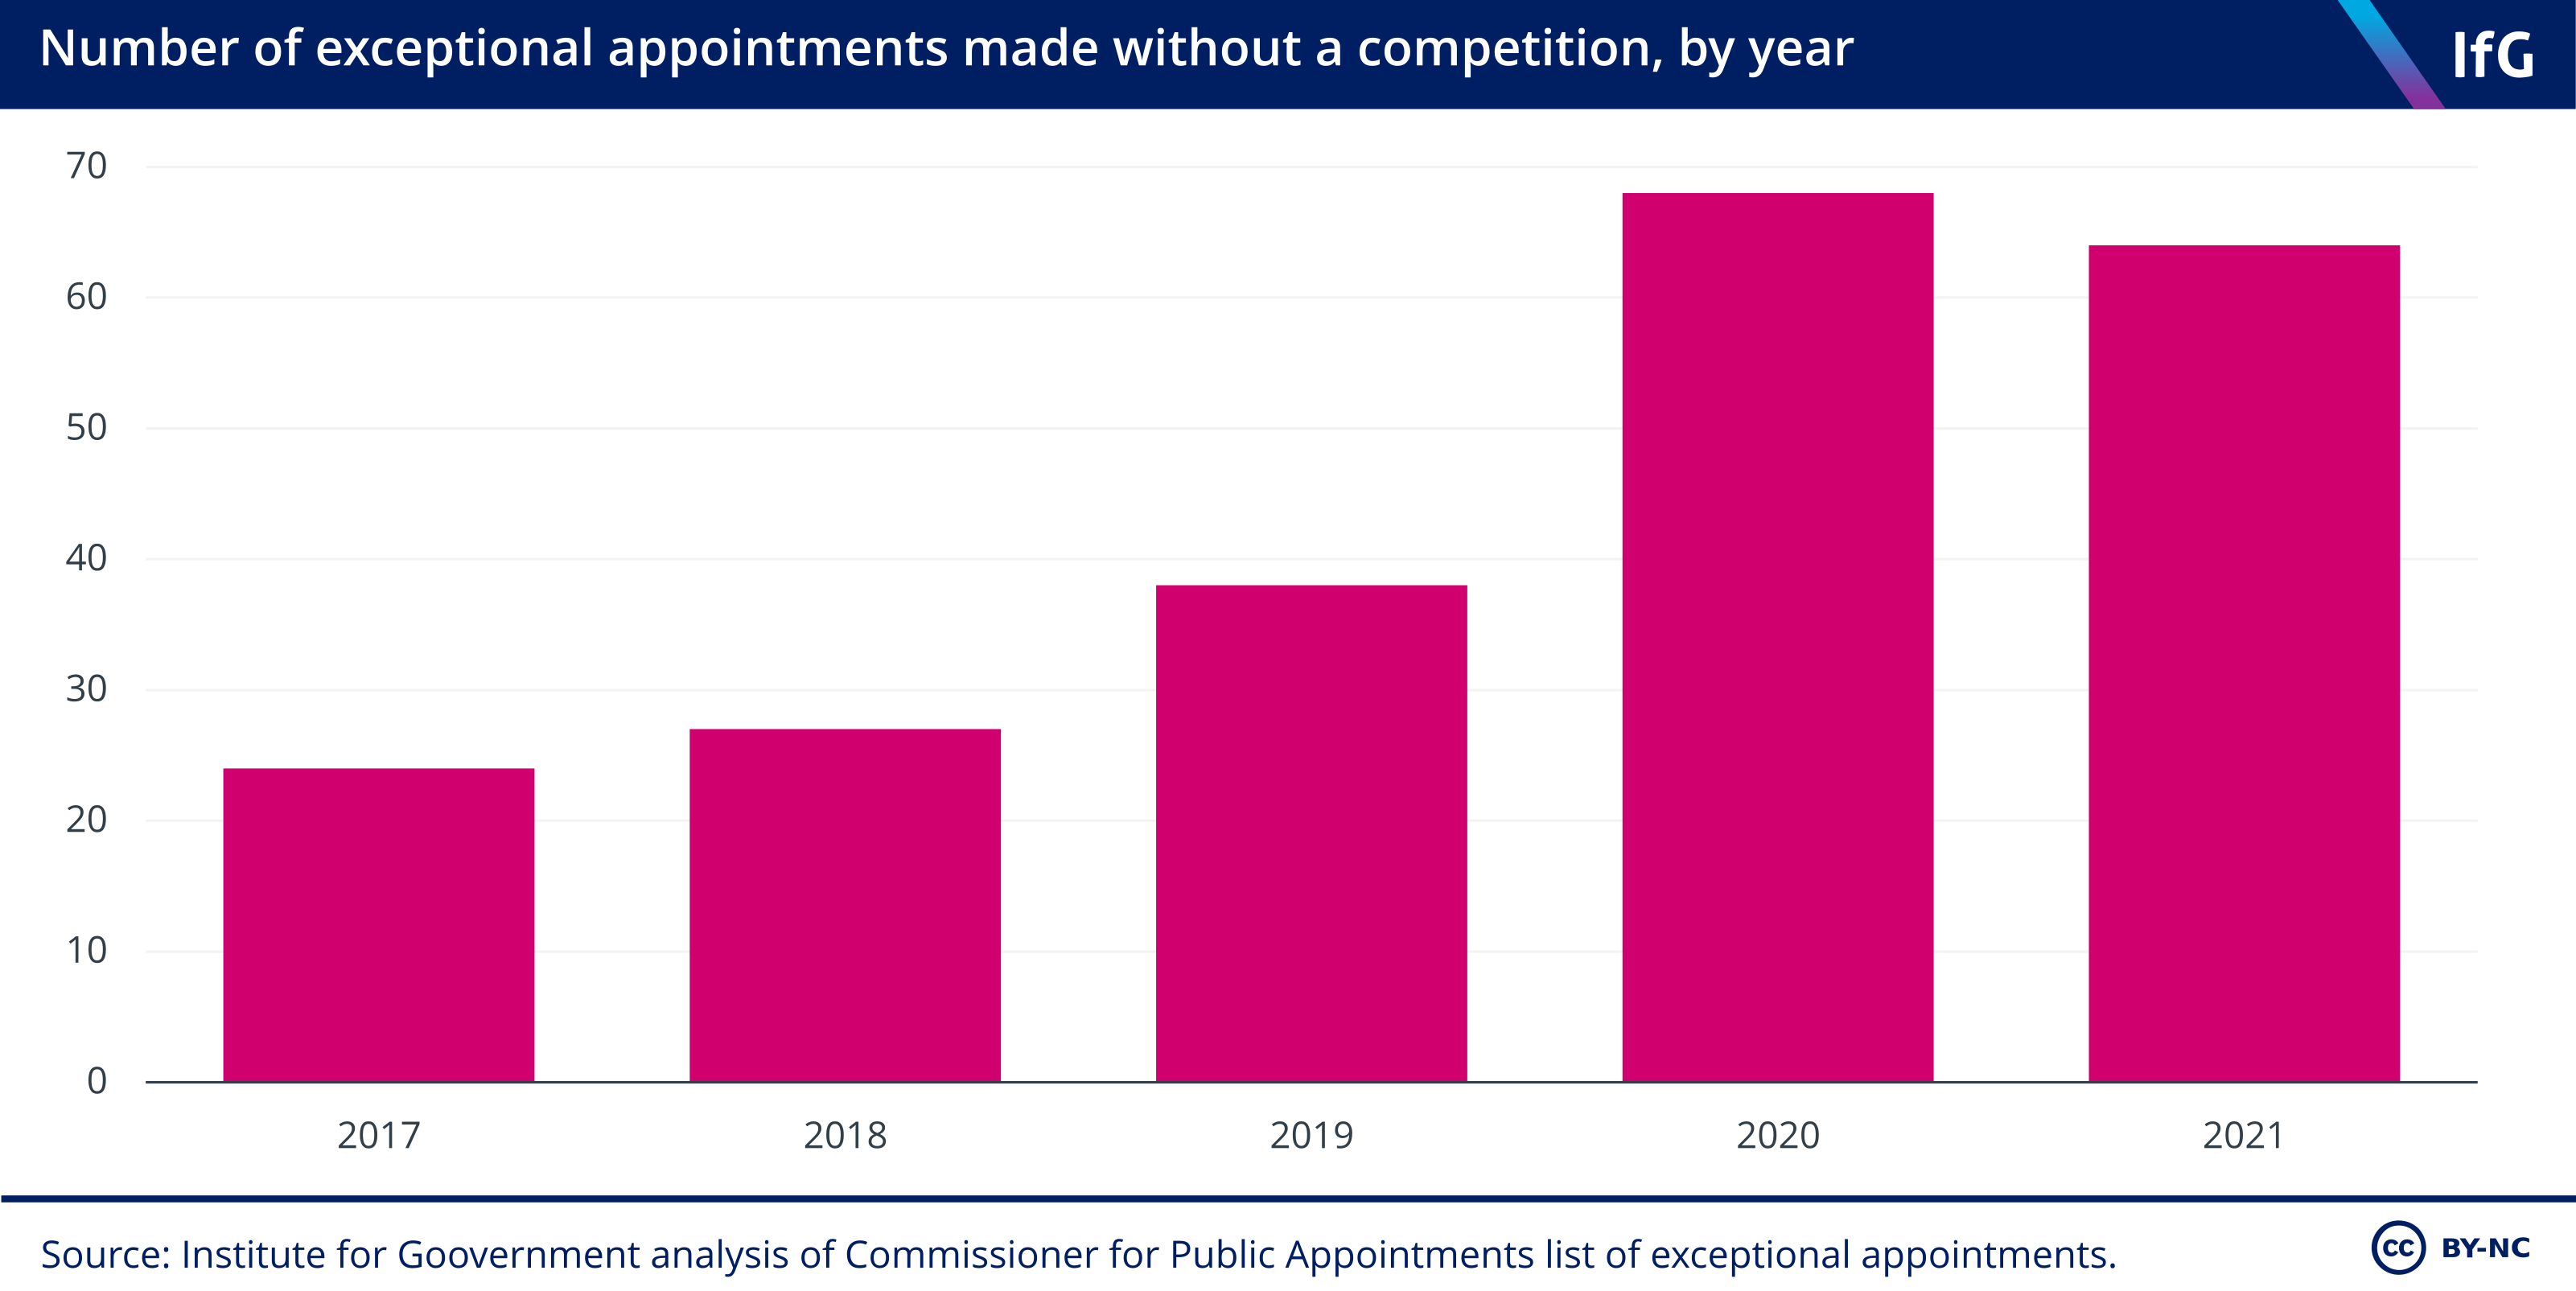 Number of exceptional appointments made without a competition